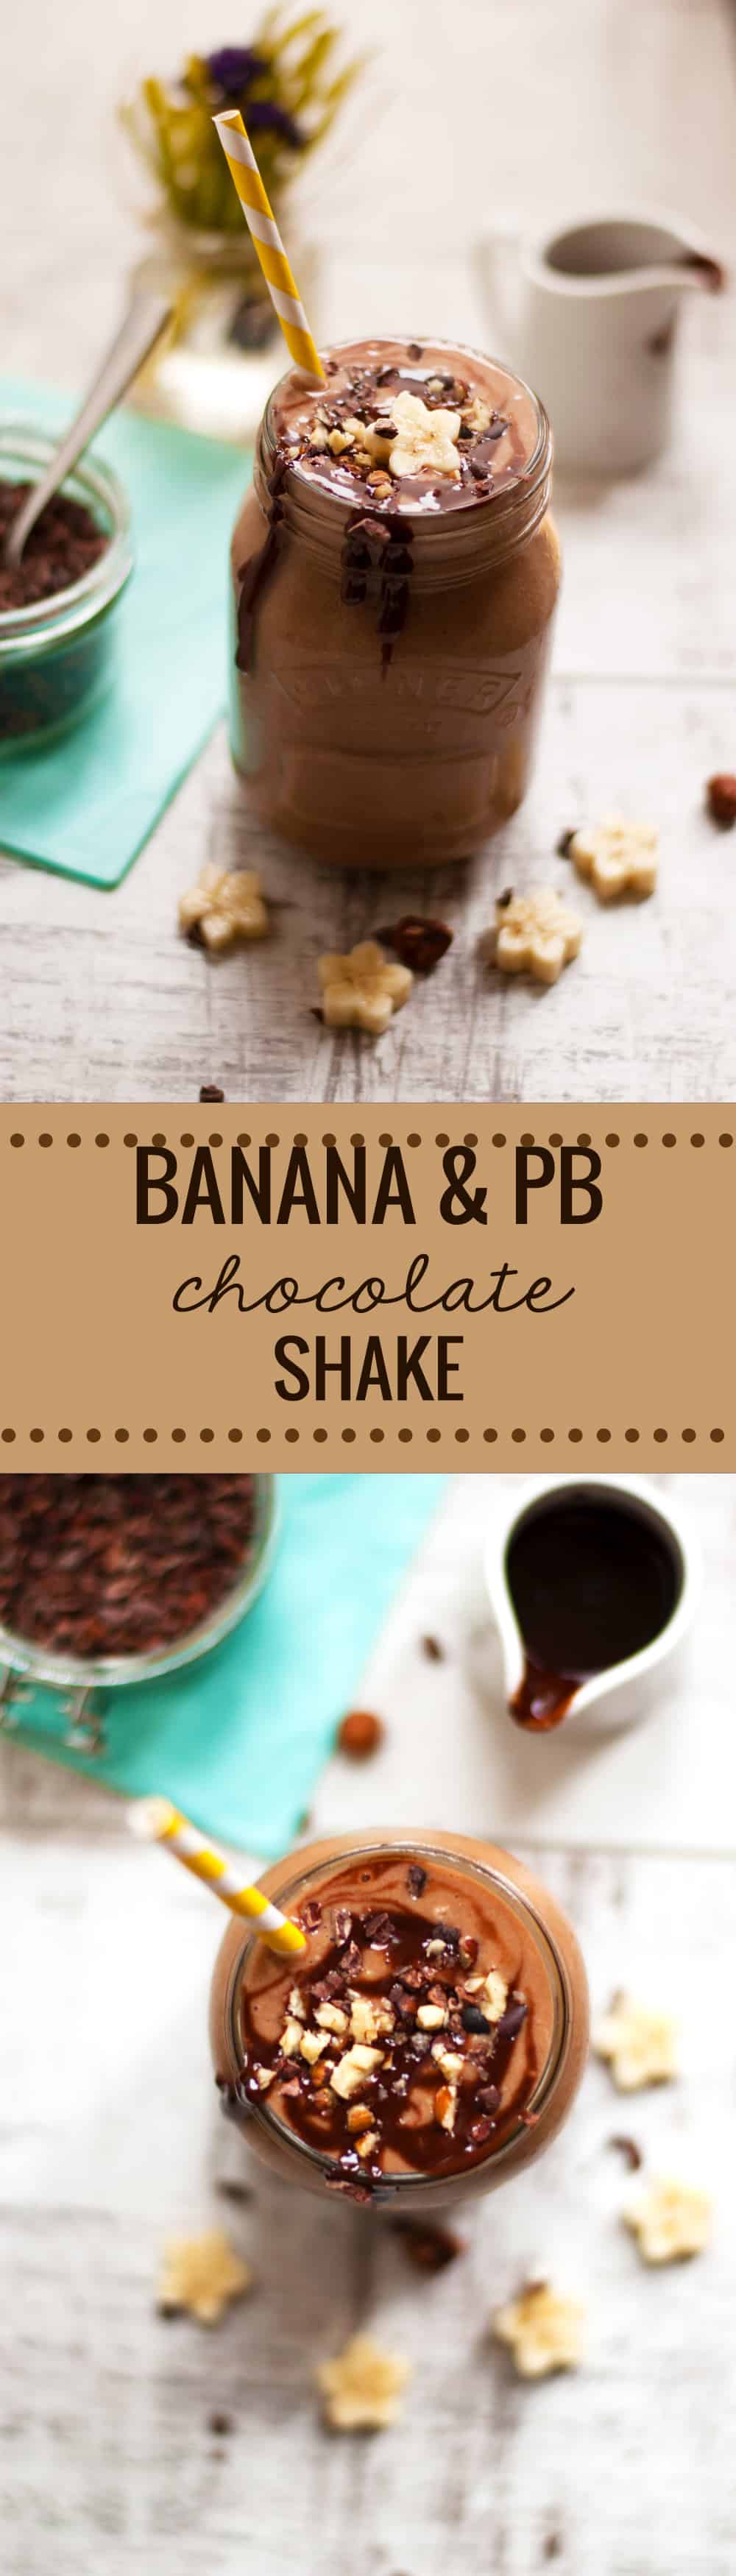 Quick recipe for delicious, creamy and thick chocolate shake with bananas and peanut butter. Made with only 5 ingredients and ready in 5 minutes, you will love it! via @ annabanana.co